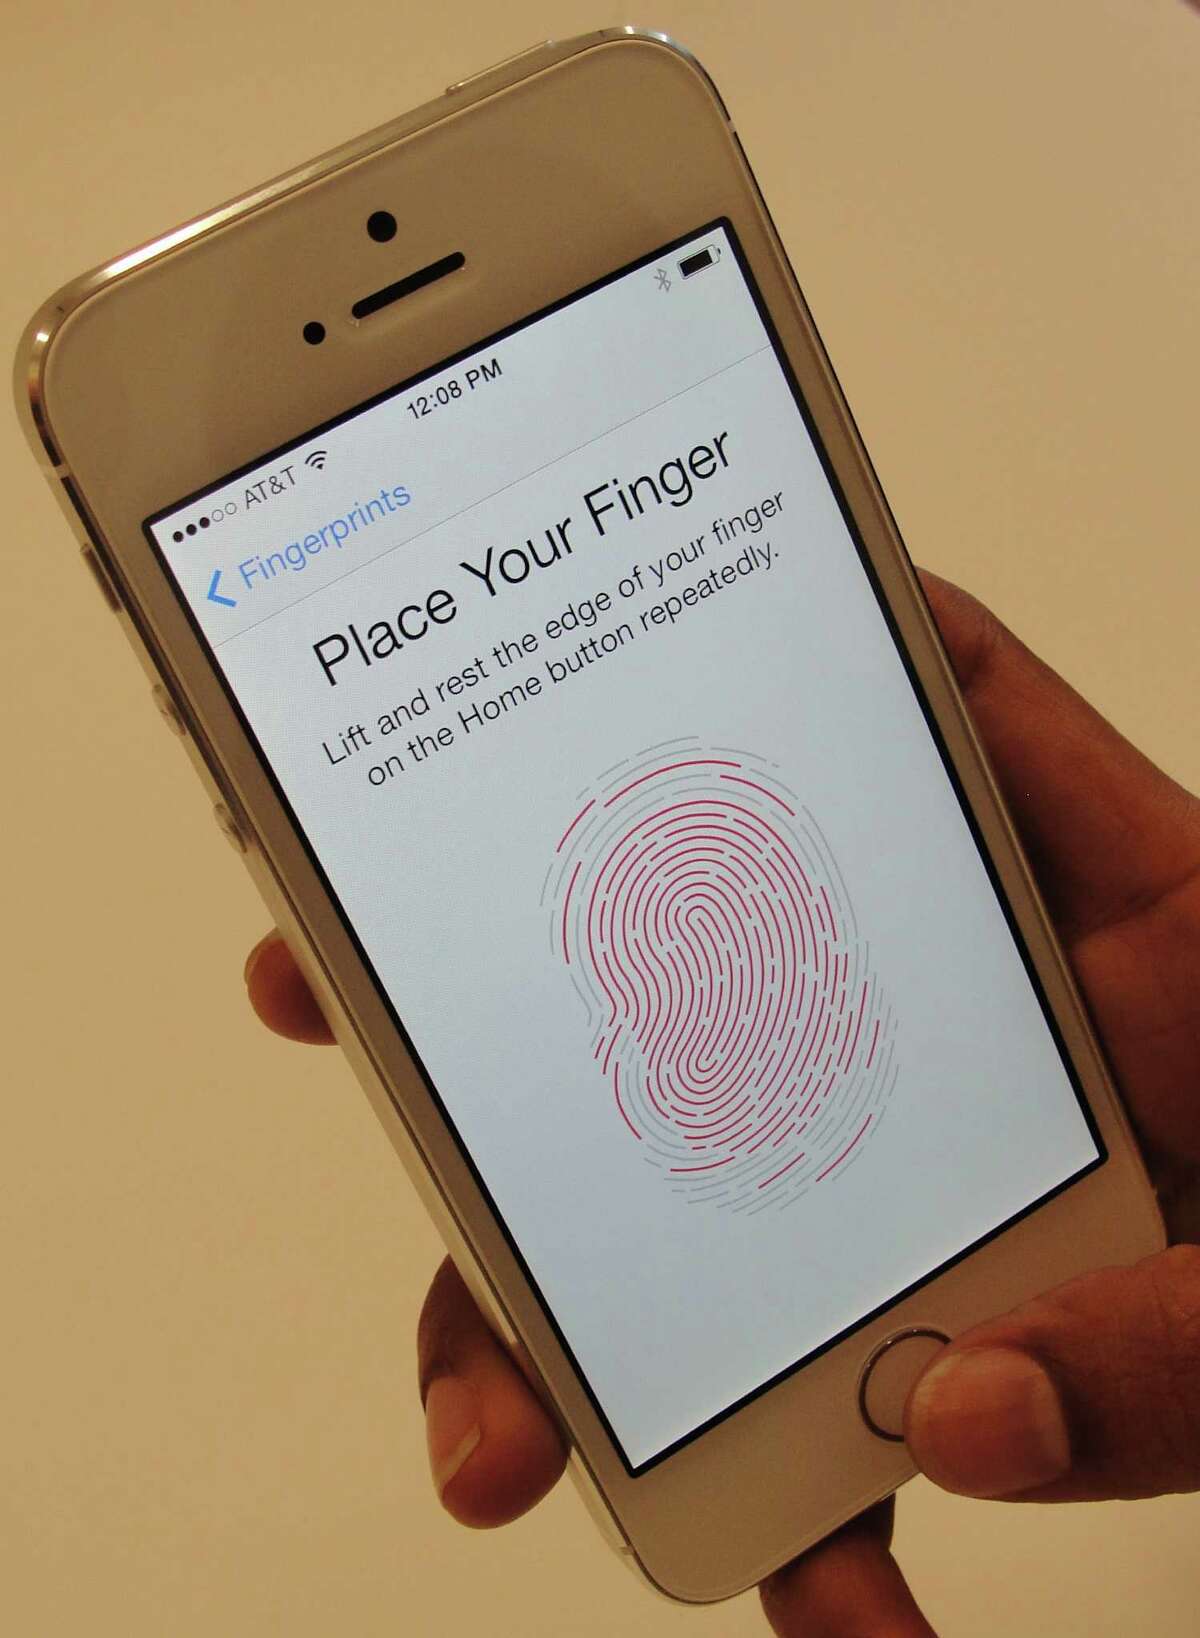 Earlier this year, USAA added the option of using fingerprint technology.